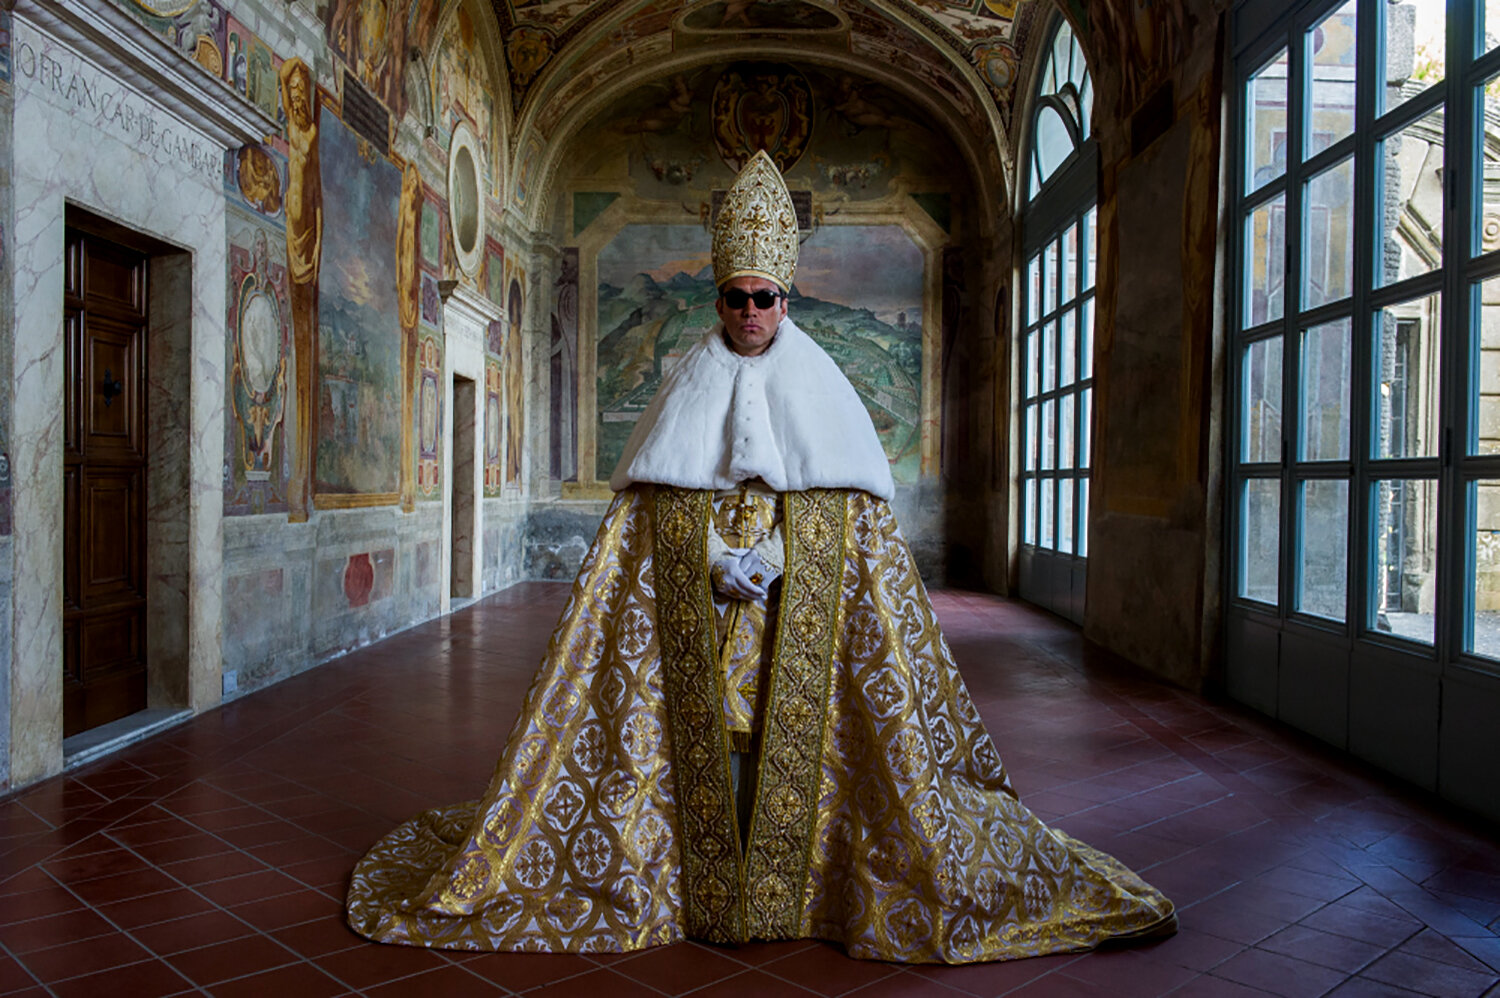 THE YOUNG POPE (2019)